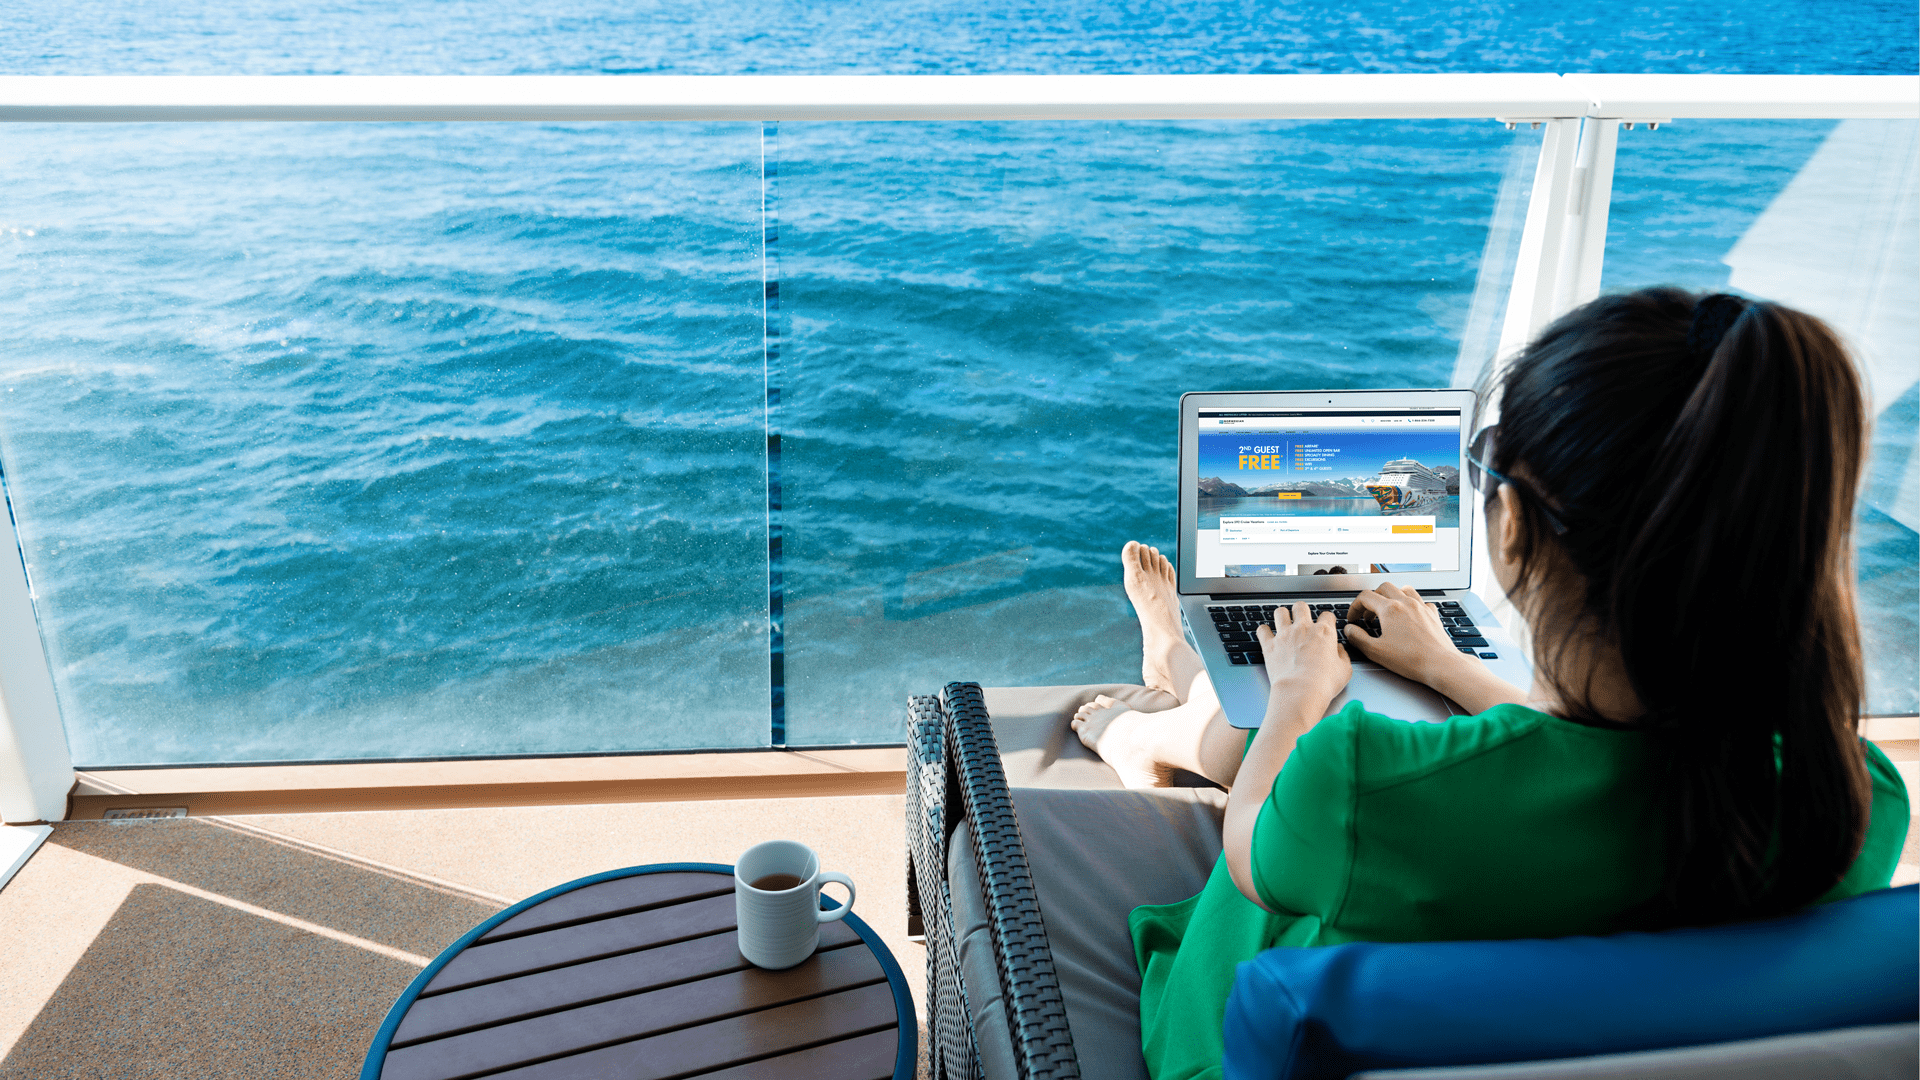 How Much Is Wifi On Norwegian Cruise Line